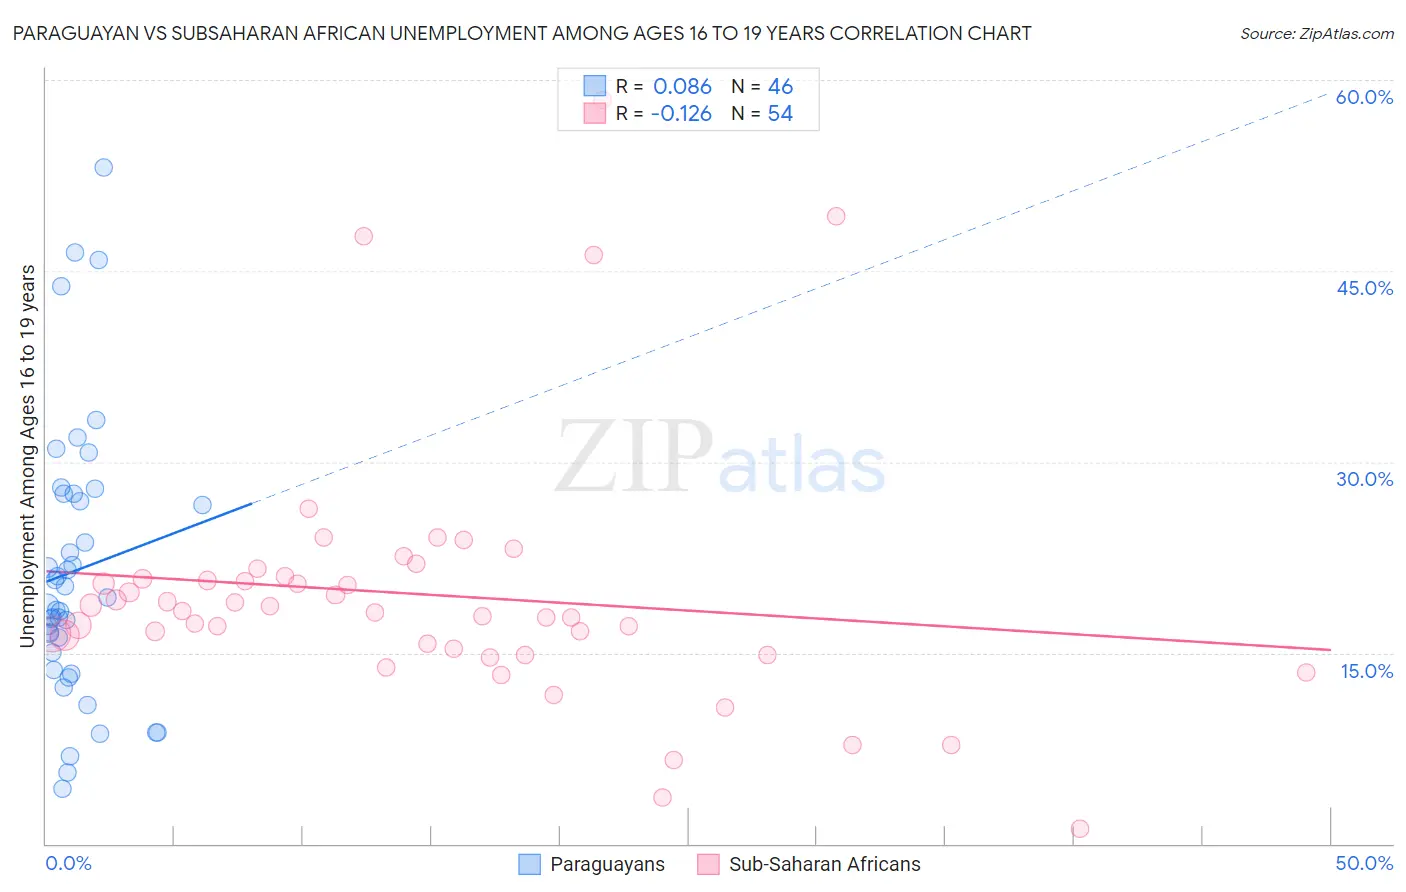 Paraguayan vs Subsaharan African Unemployment Among Ages 16 to 19 years